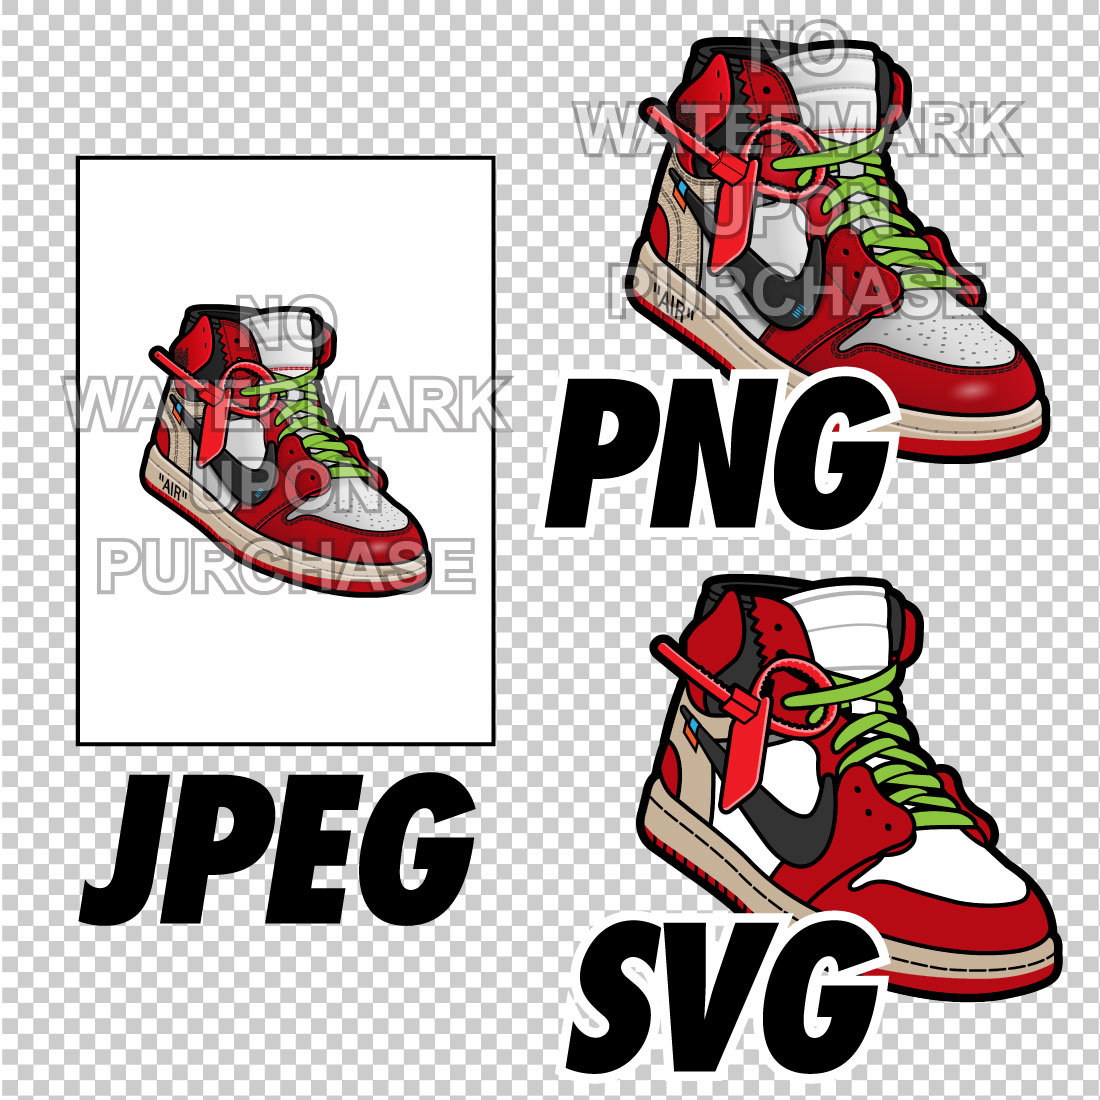 Air Jordan 1 Off White Chicago with Lace Swap in JPEG PNG SVG Sneaker Art right & left shoe bundle preview image.